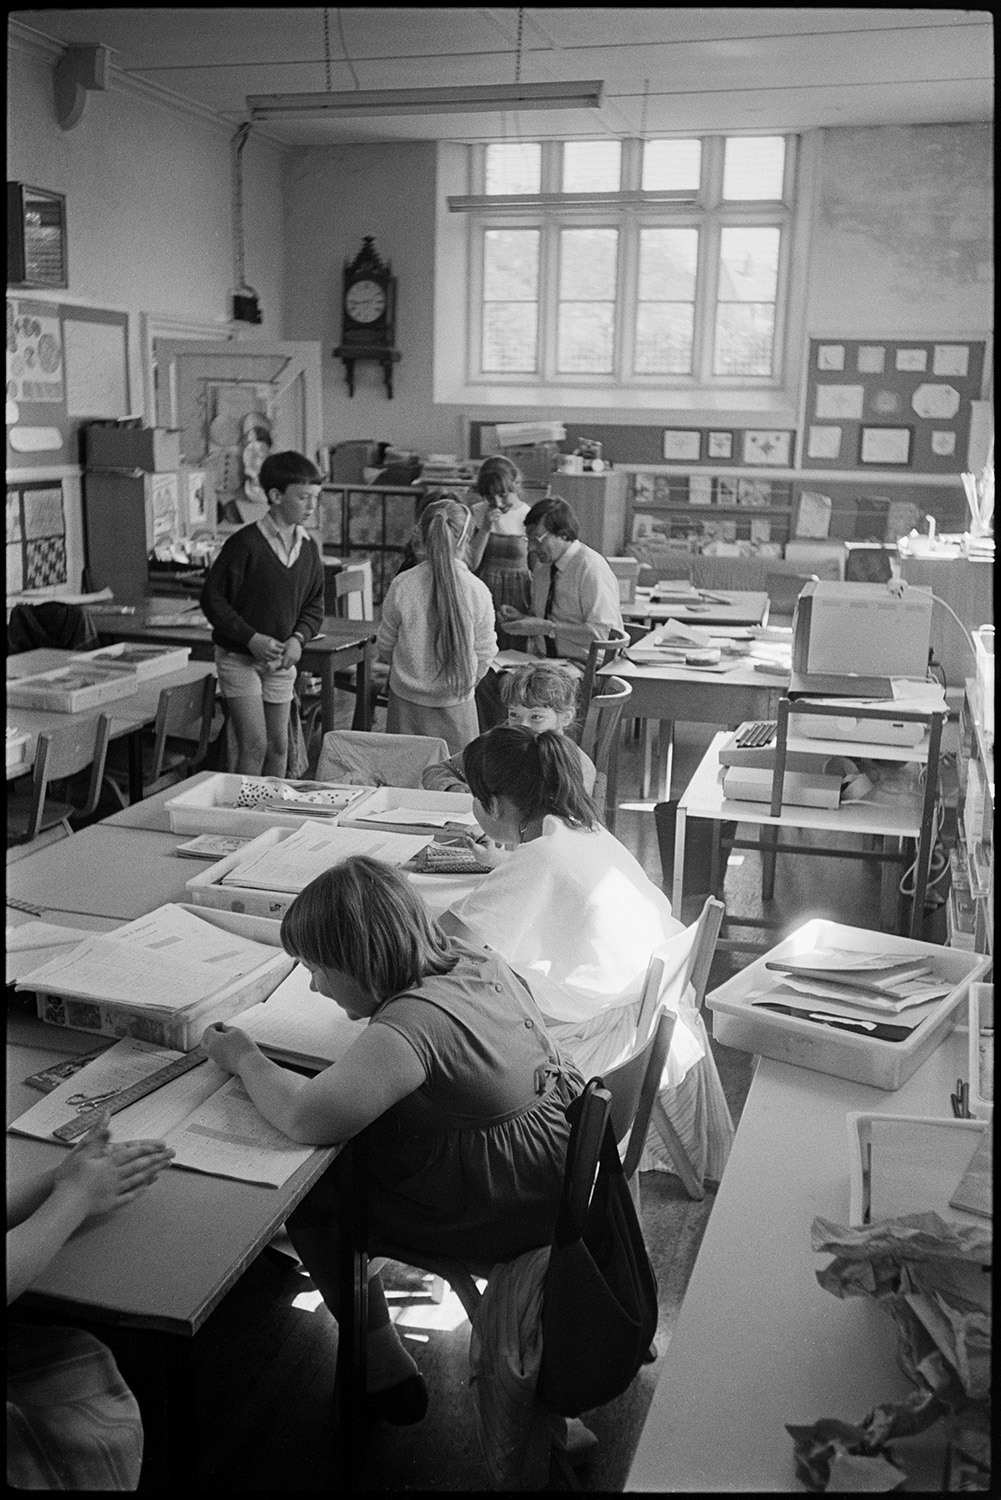 Primary school. Teacher helping pupils. Children working outside in hot sun.
[Richard Sampson, Headmaster, working with children in a classroom at Chulmleigh Primary School. The children's work is displayed around the room.]